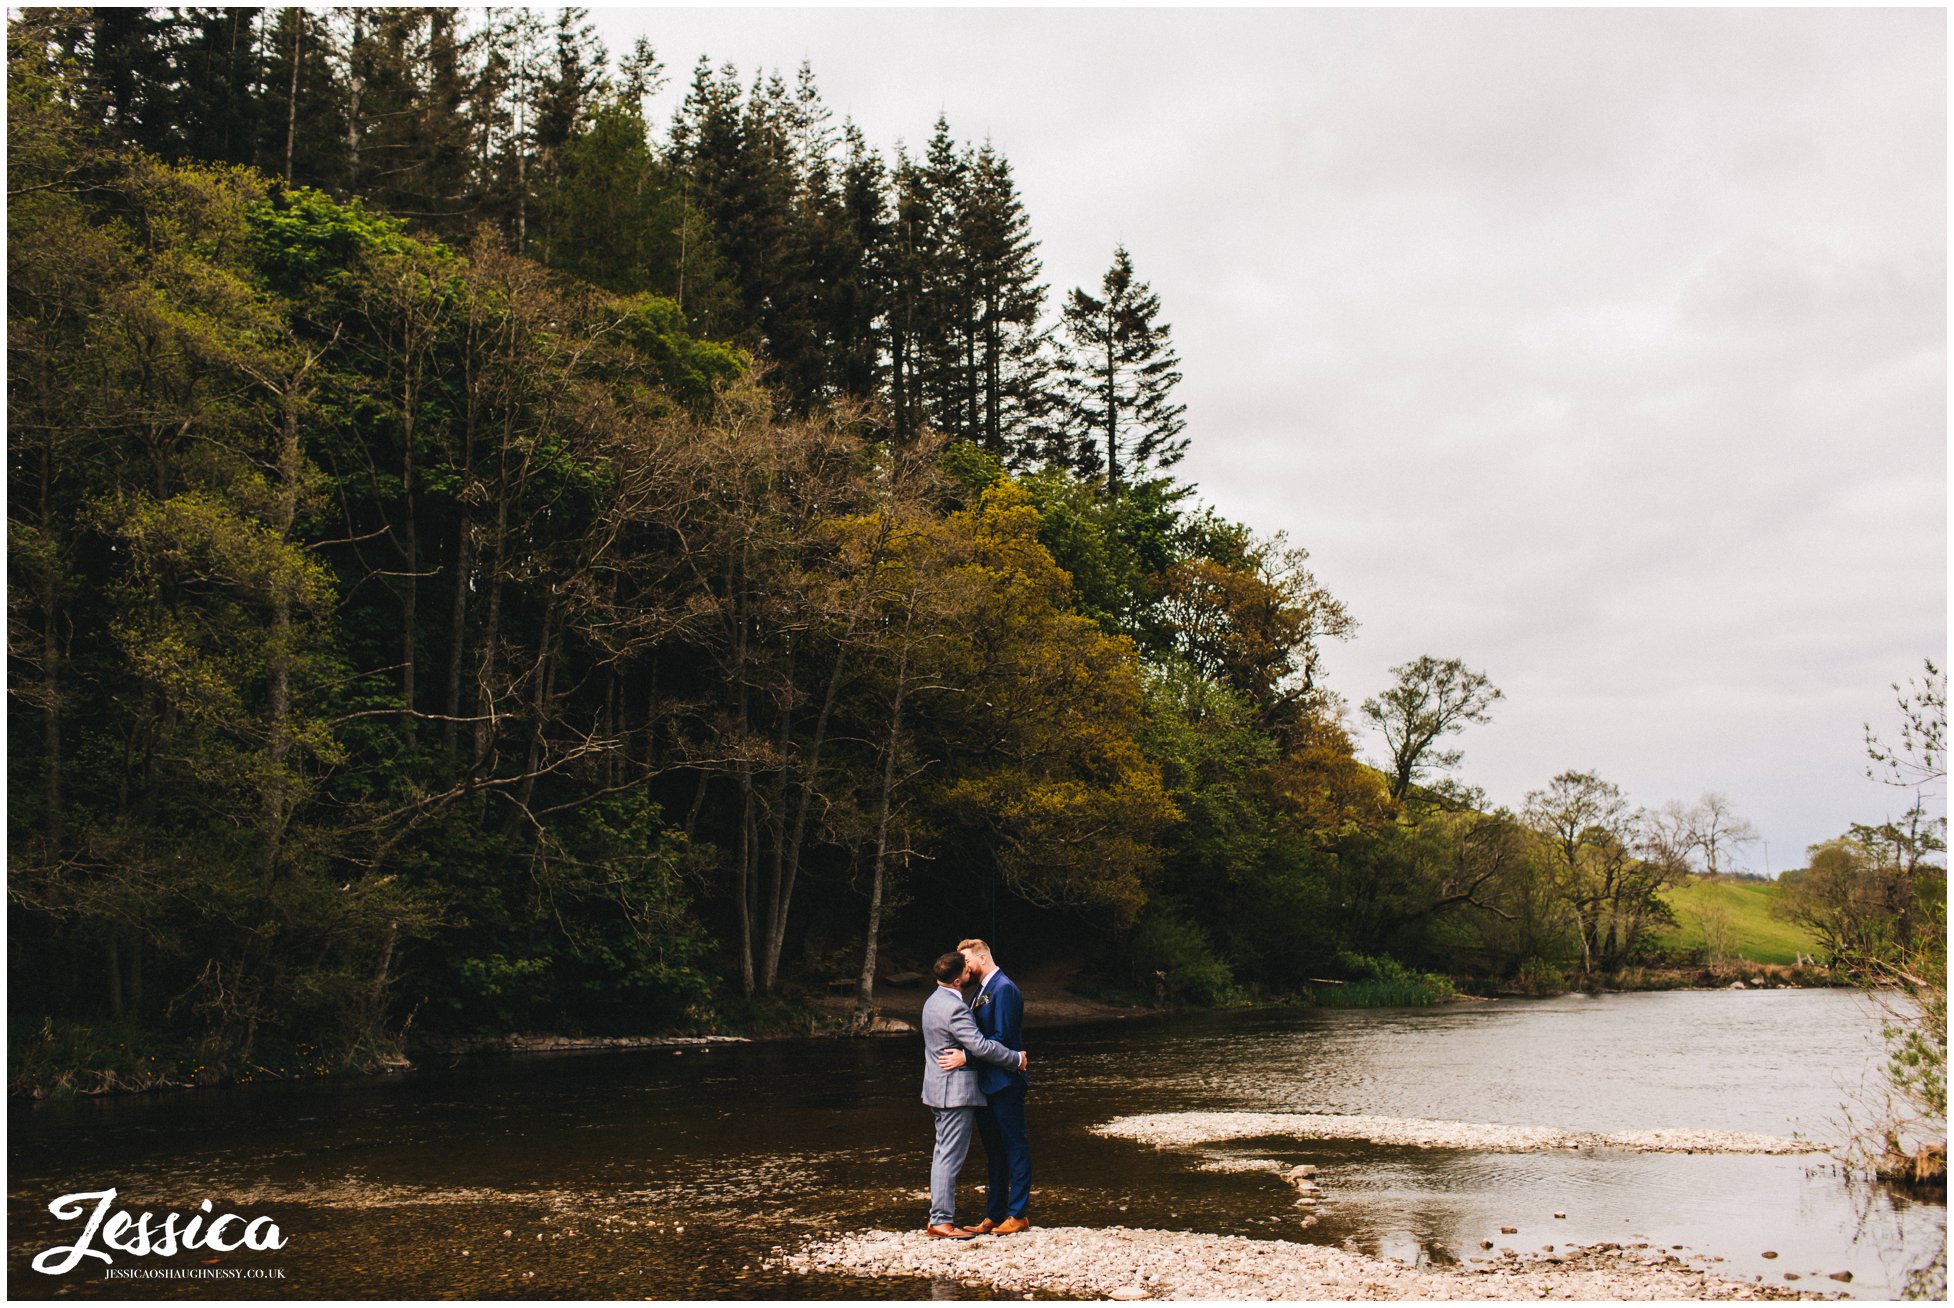 the couple share a kiss down by the river in pooley bridge